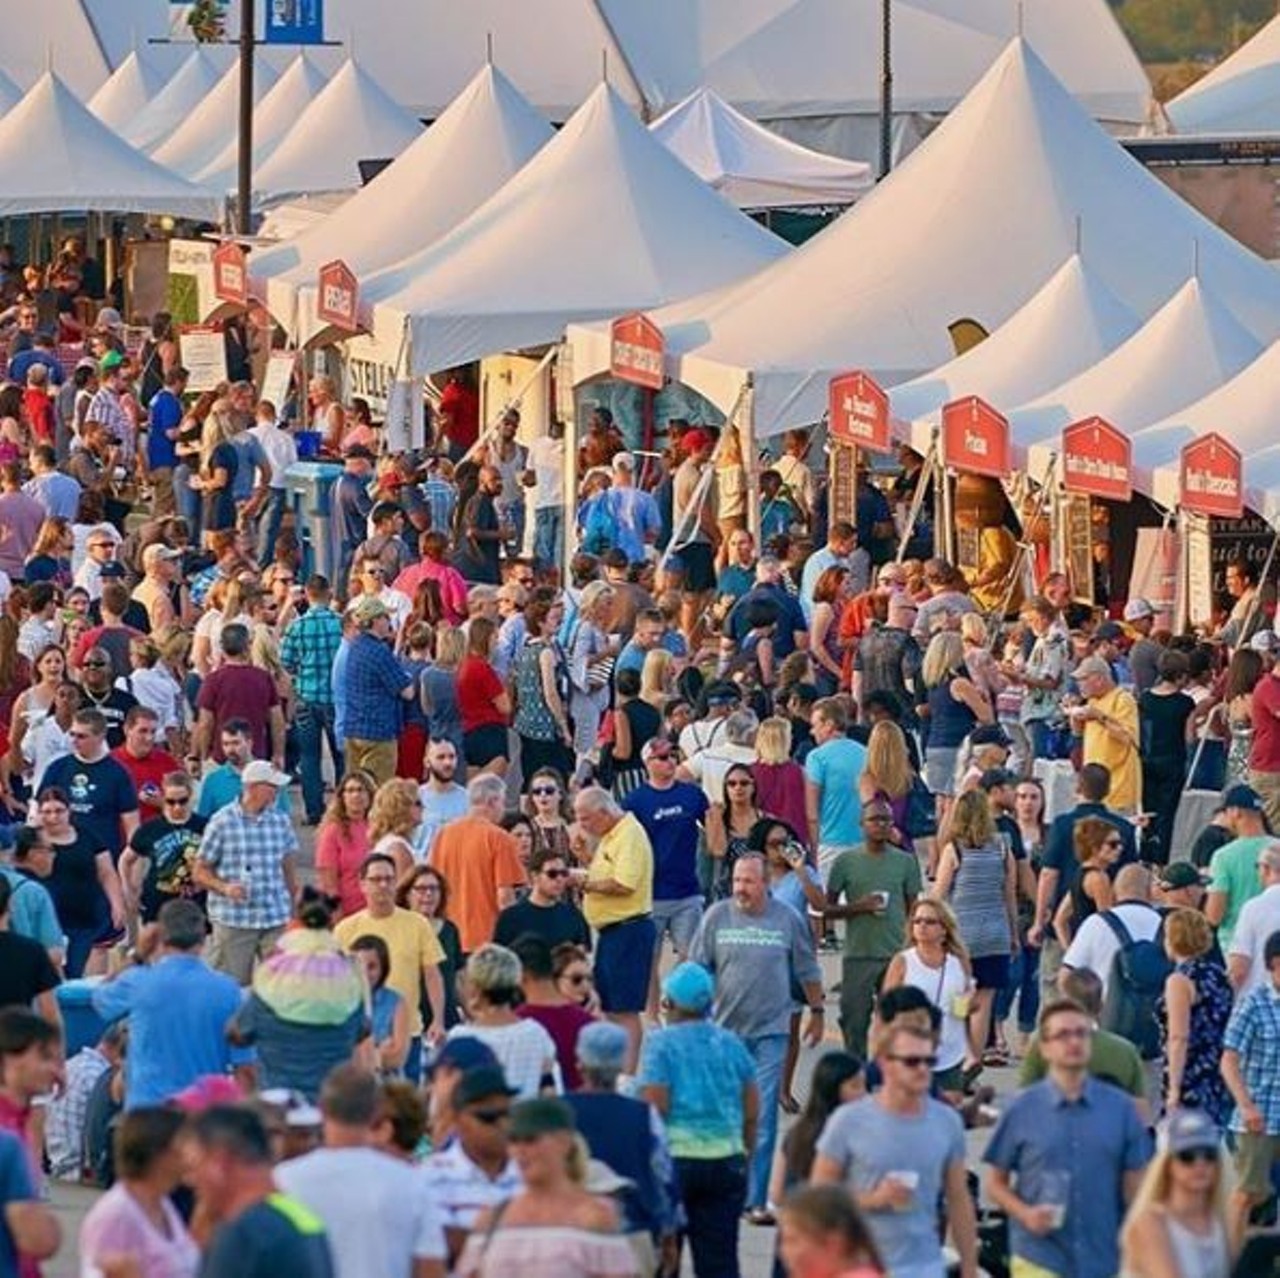 Taste of St. Louis
September 14 - 16, 2018
Chesterfield, MO
This festival brings together more than 35 local restaurants for a weekend-long celebration of the St. Louis food scene. Yes, this festival is held all the way out in Chesterfield now, but some events are worth the drive. At Taste of St. Louis you can try nibbles from all over town, check out cooking demonstrations, meet well-known chefs and even enjoy a culinary competition. Dig into deliciousness (and don&#146;t forget to pack a snack for the long drive) at Taste of St. Louis this September.
Photo courtesy of Pro Photo STL
Find more information about the event here.